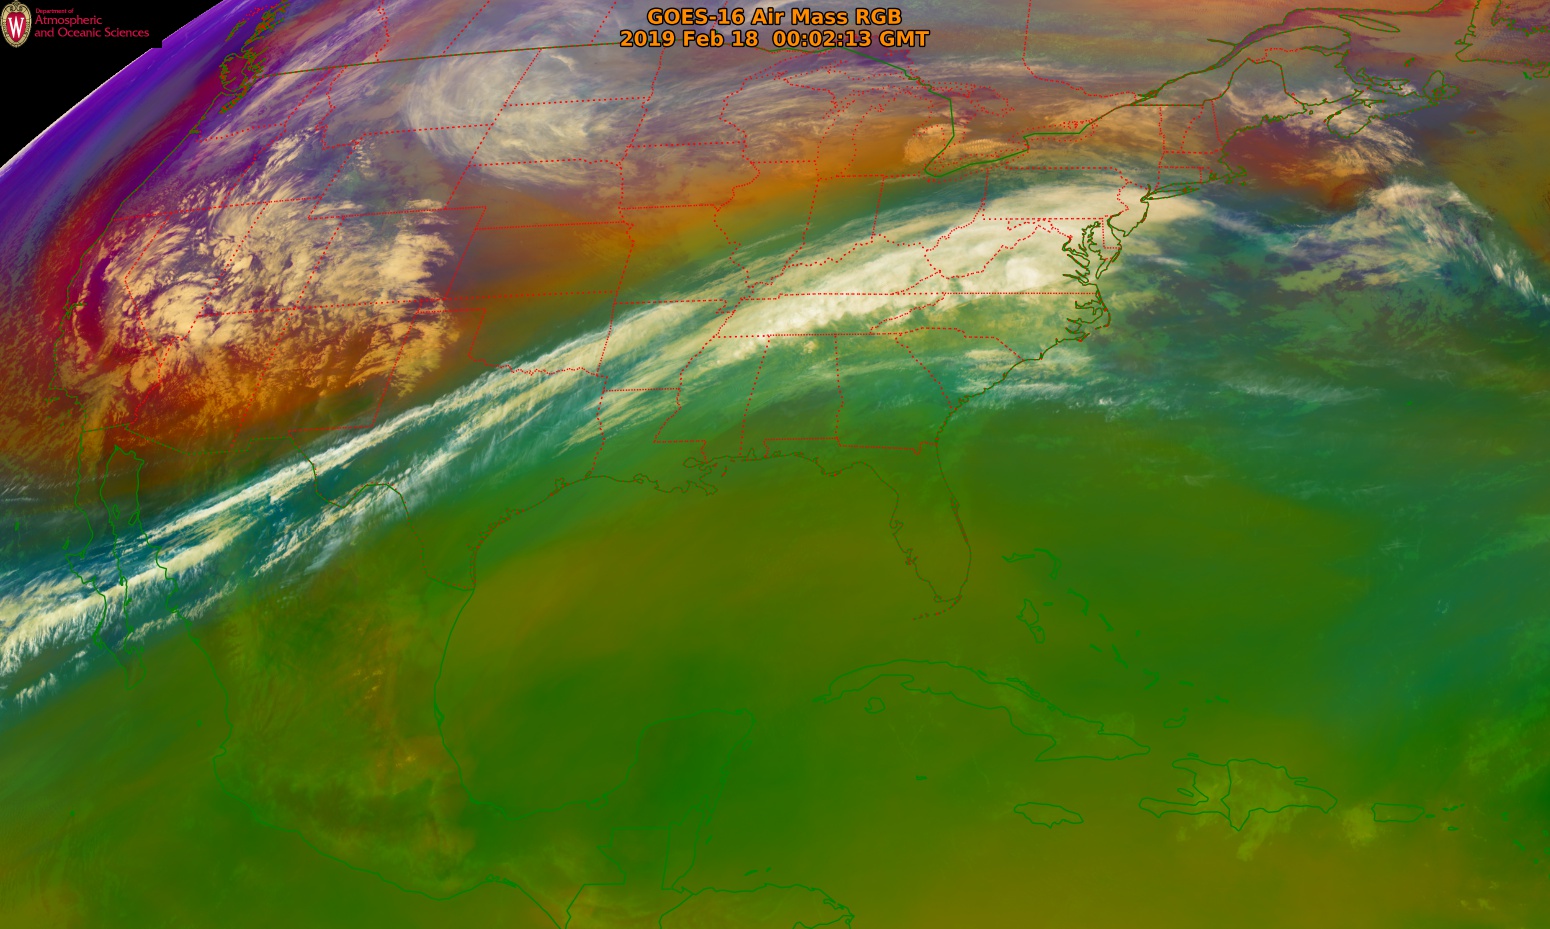 GOES-16 Air Mass RGB images [click to play animation | MP4]